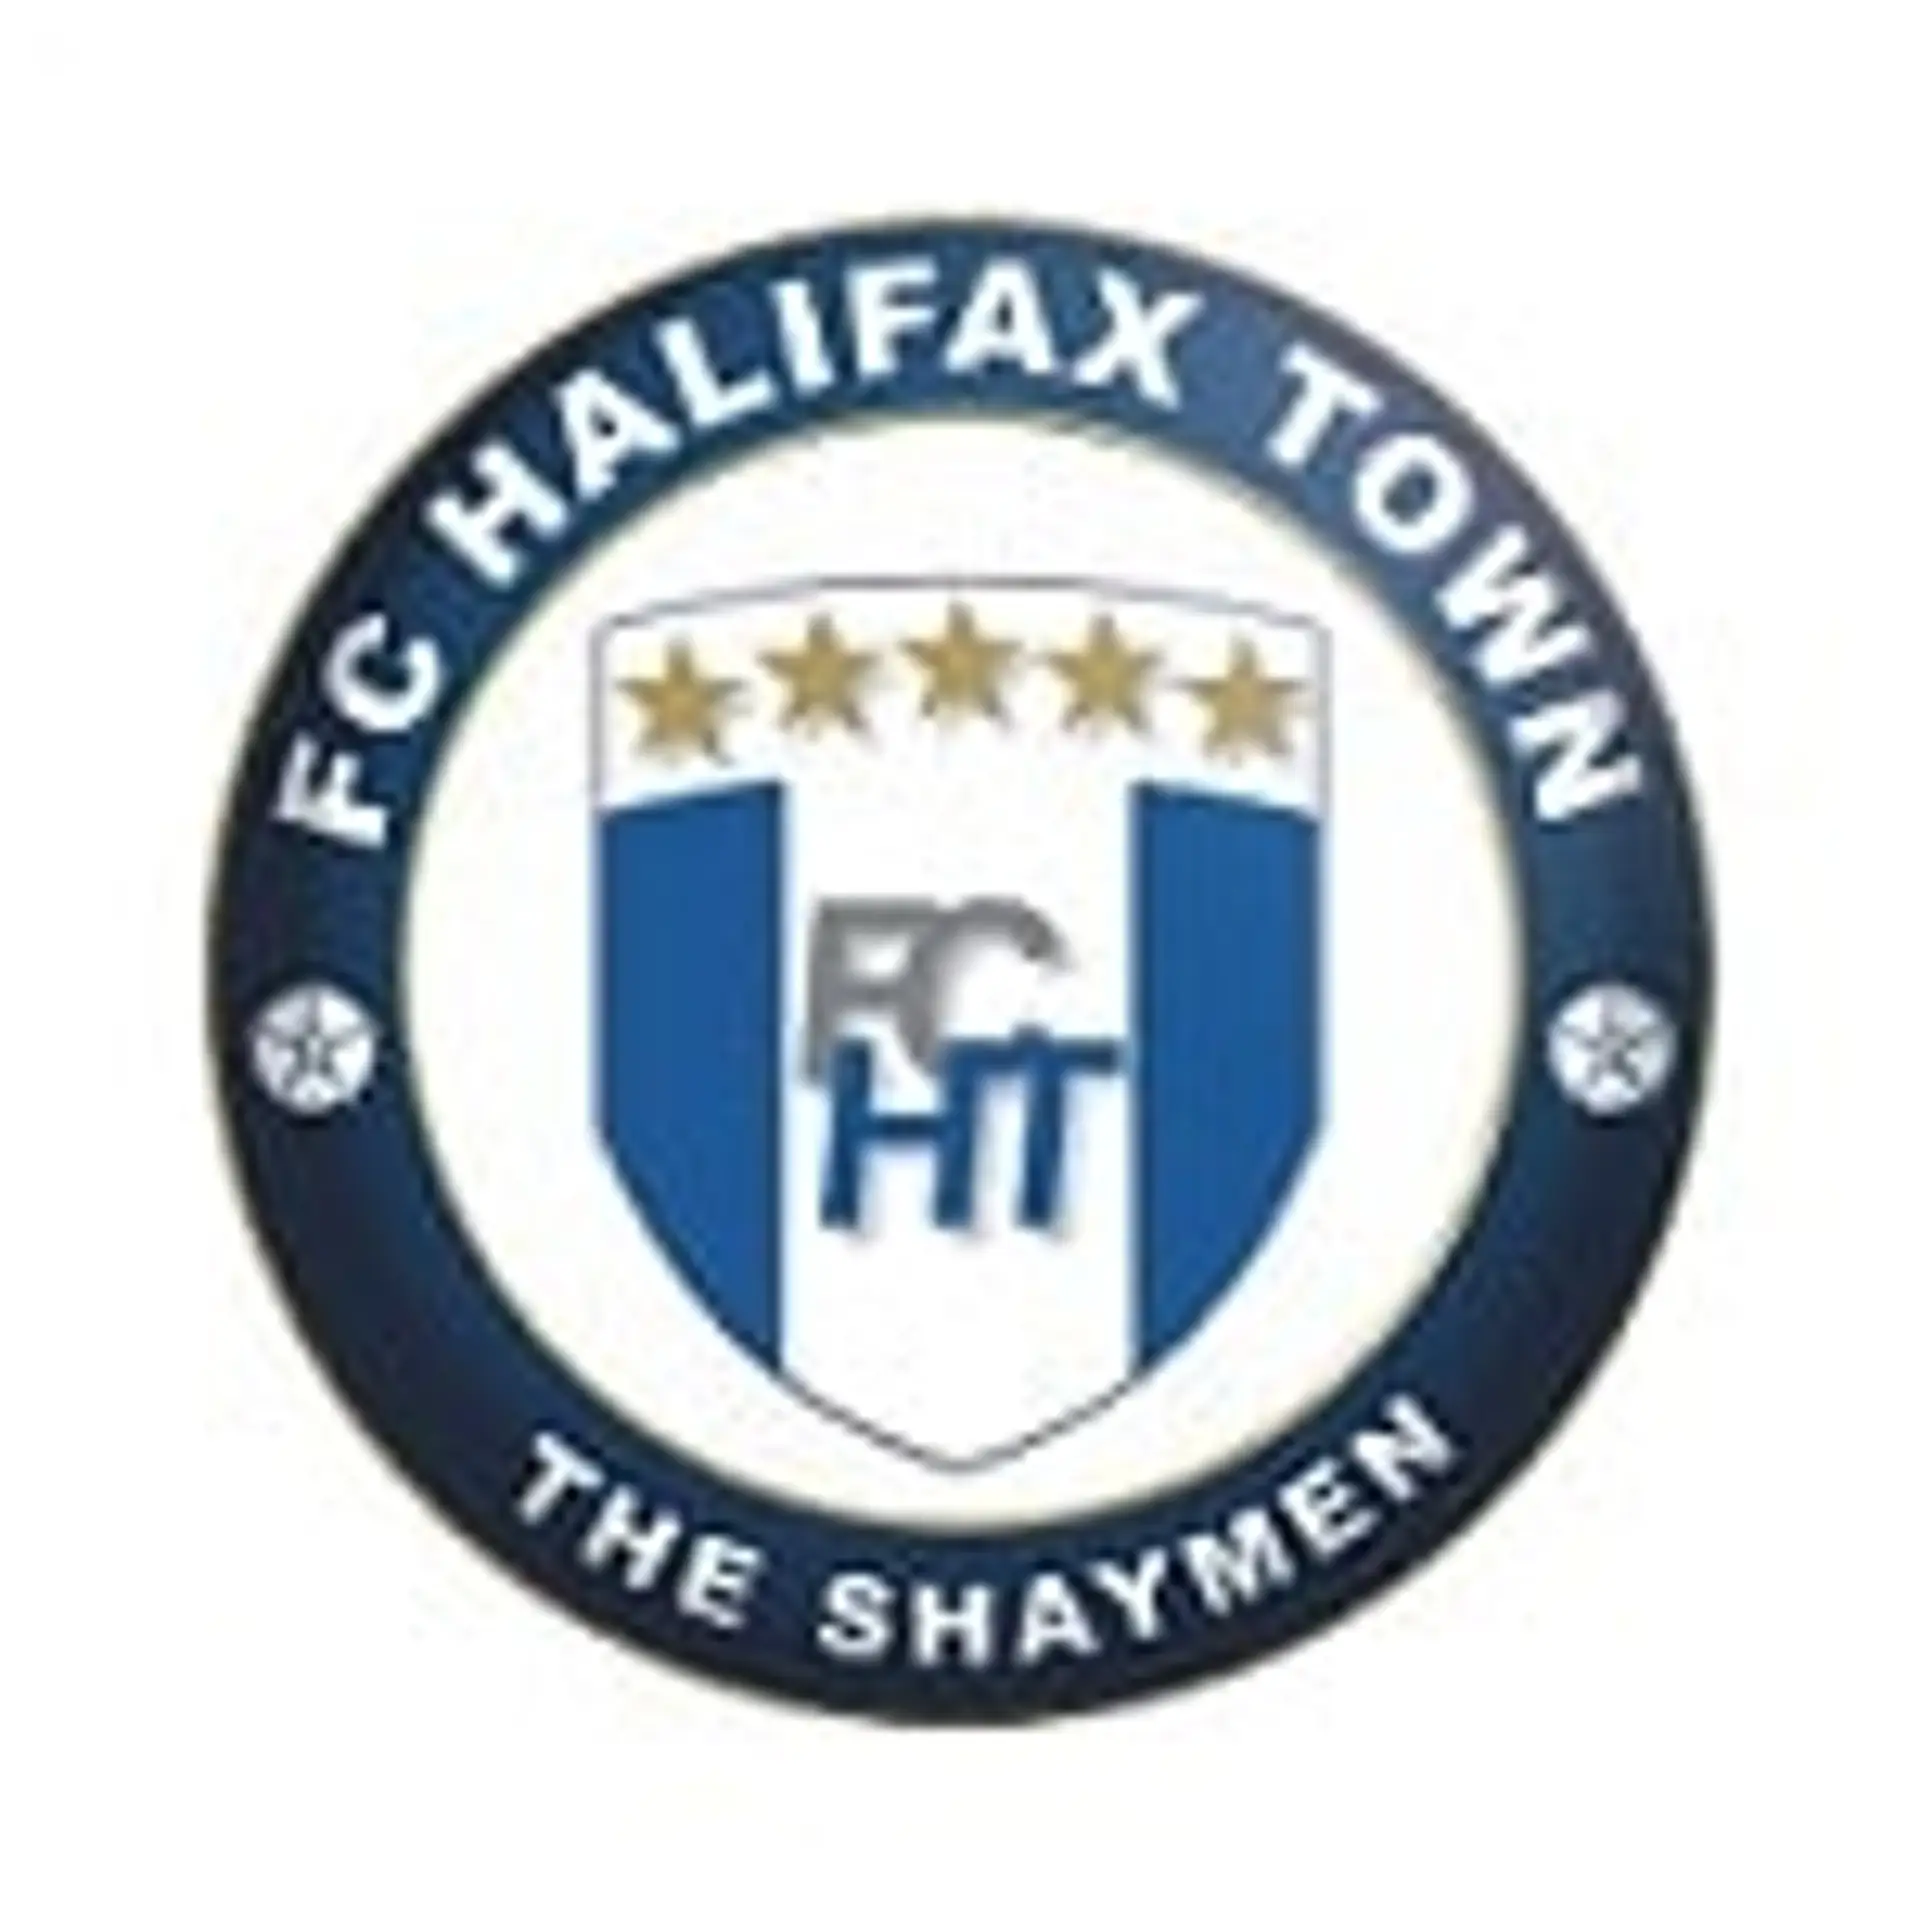 Halifax Town Tabelle 